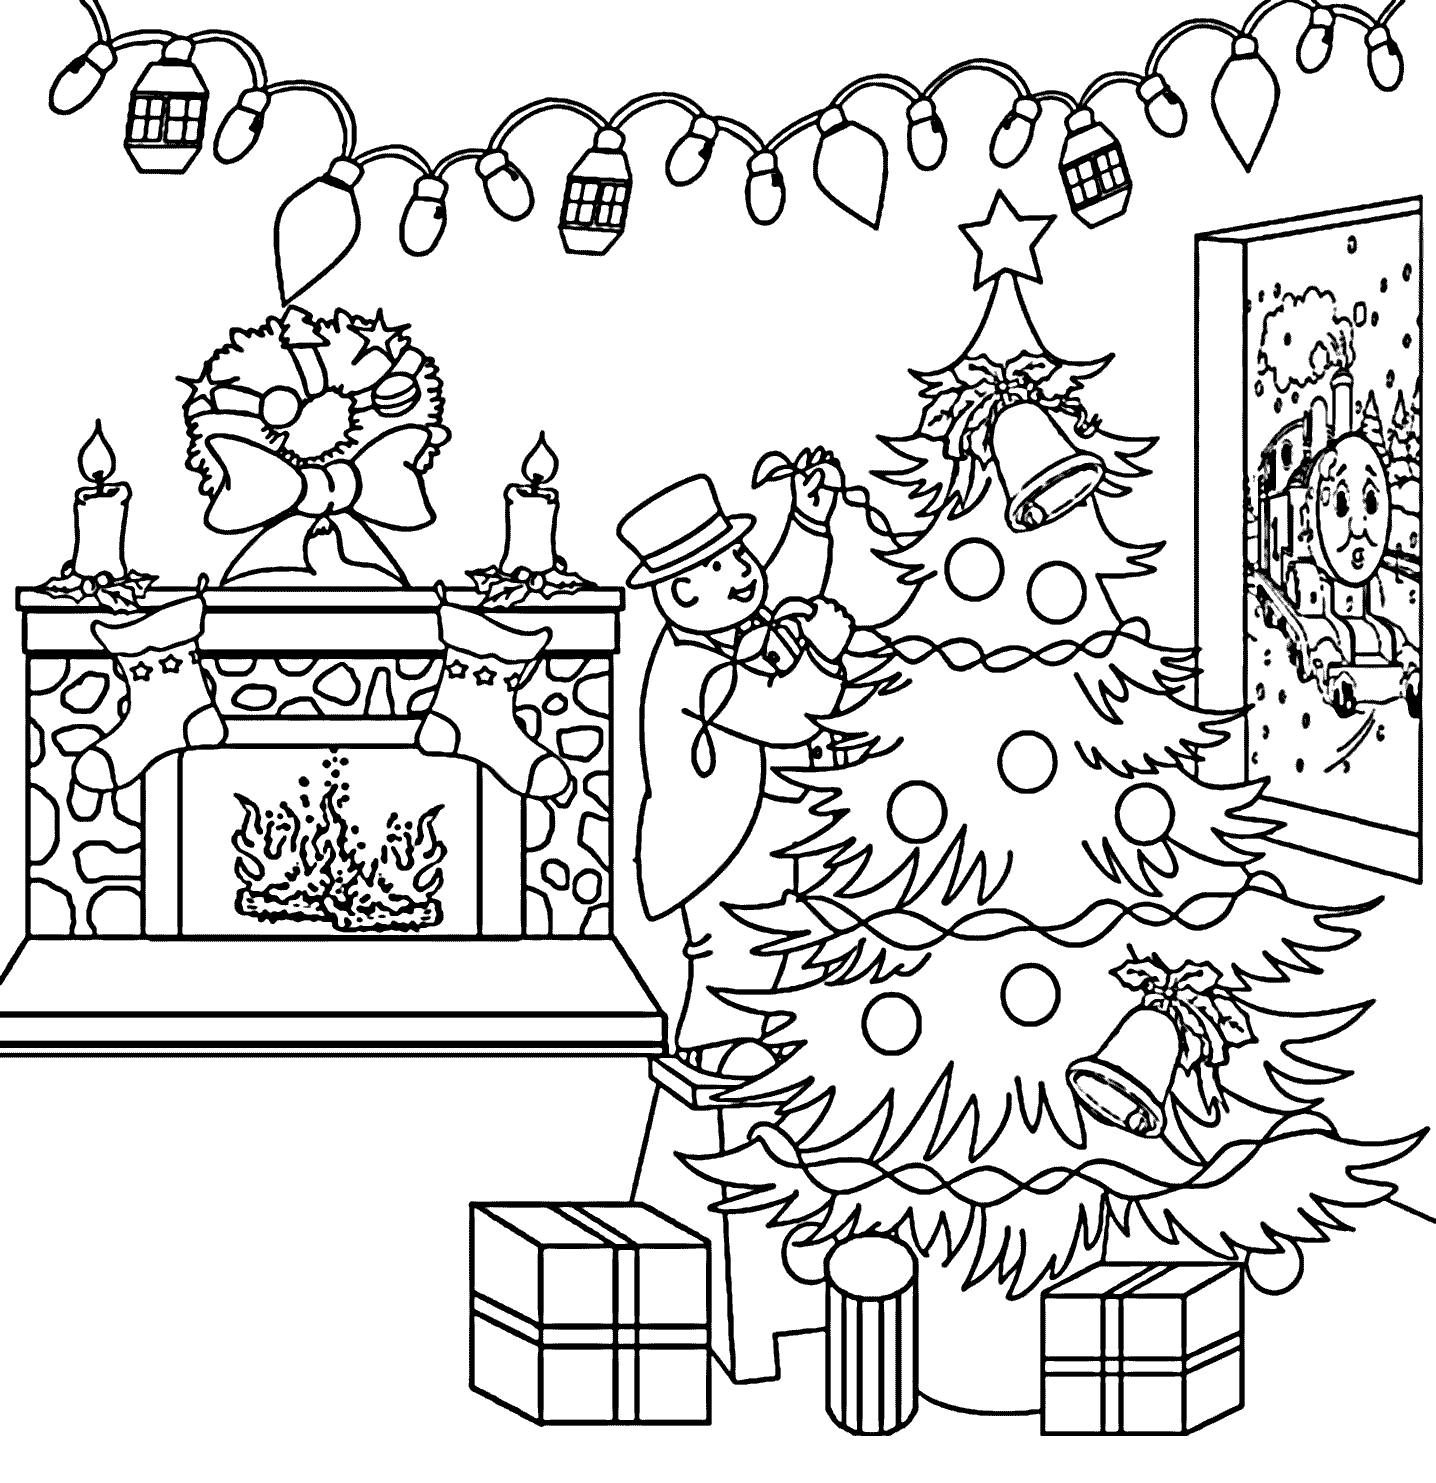 Thomas & Friends Coloring Pages